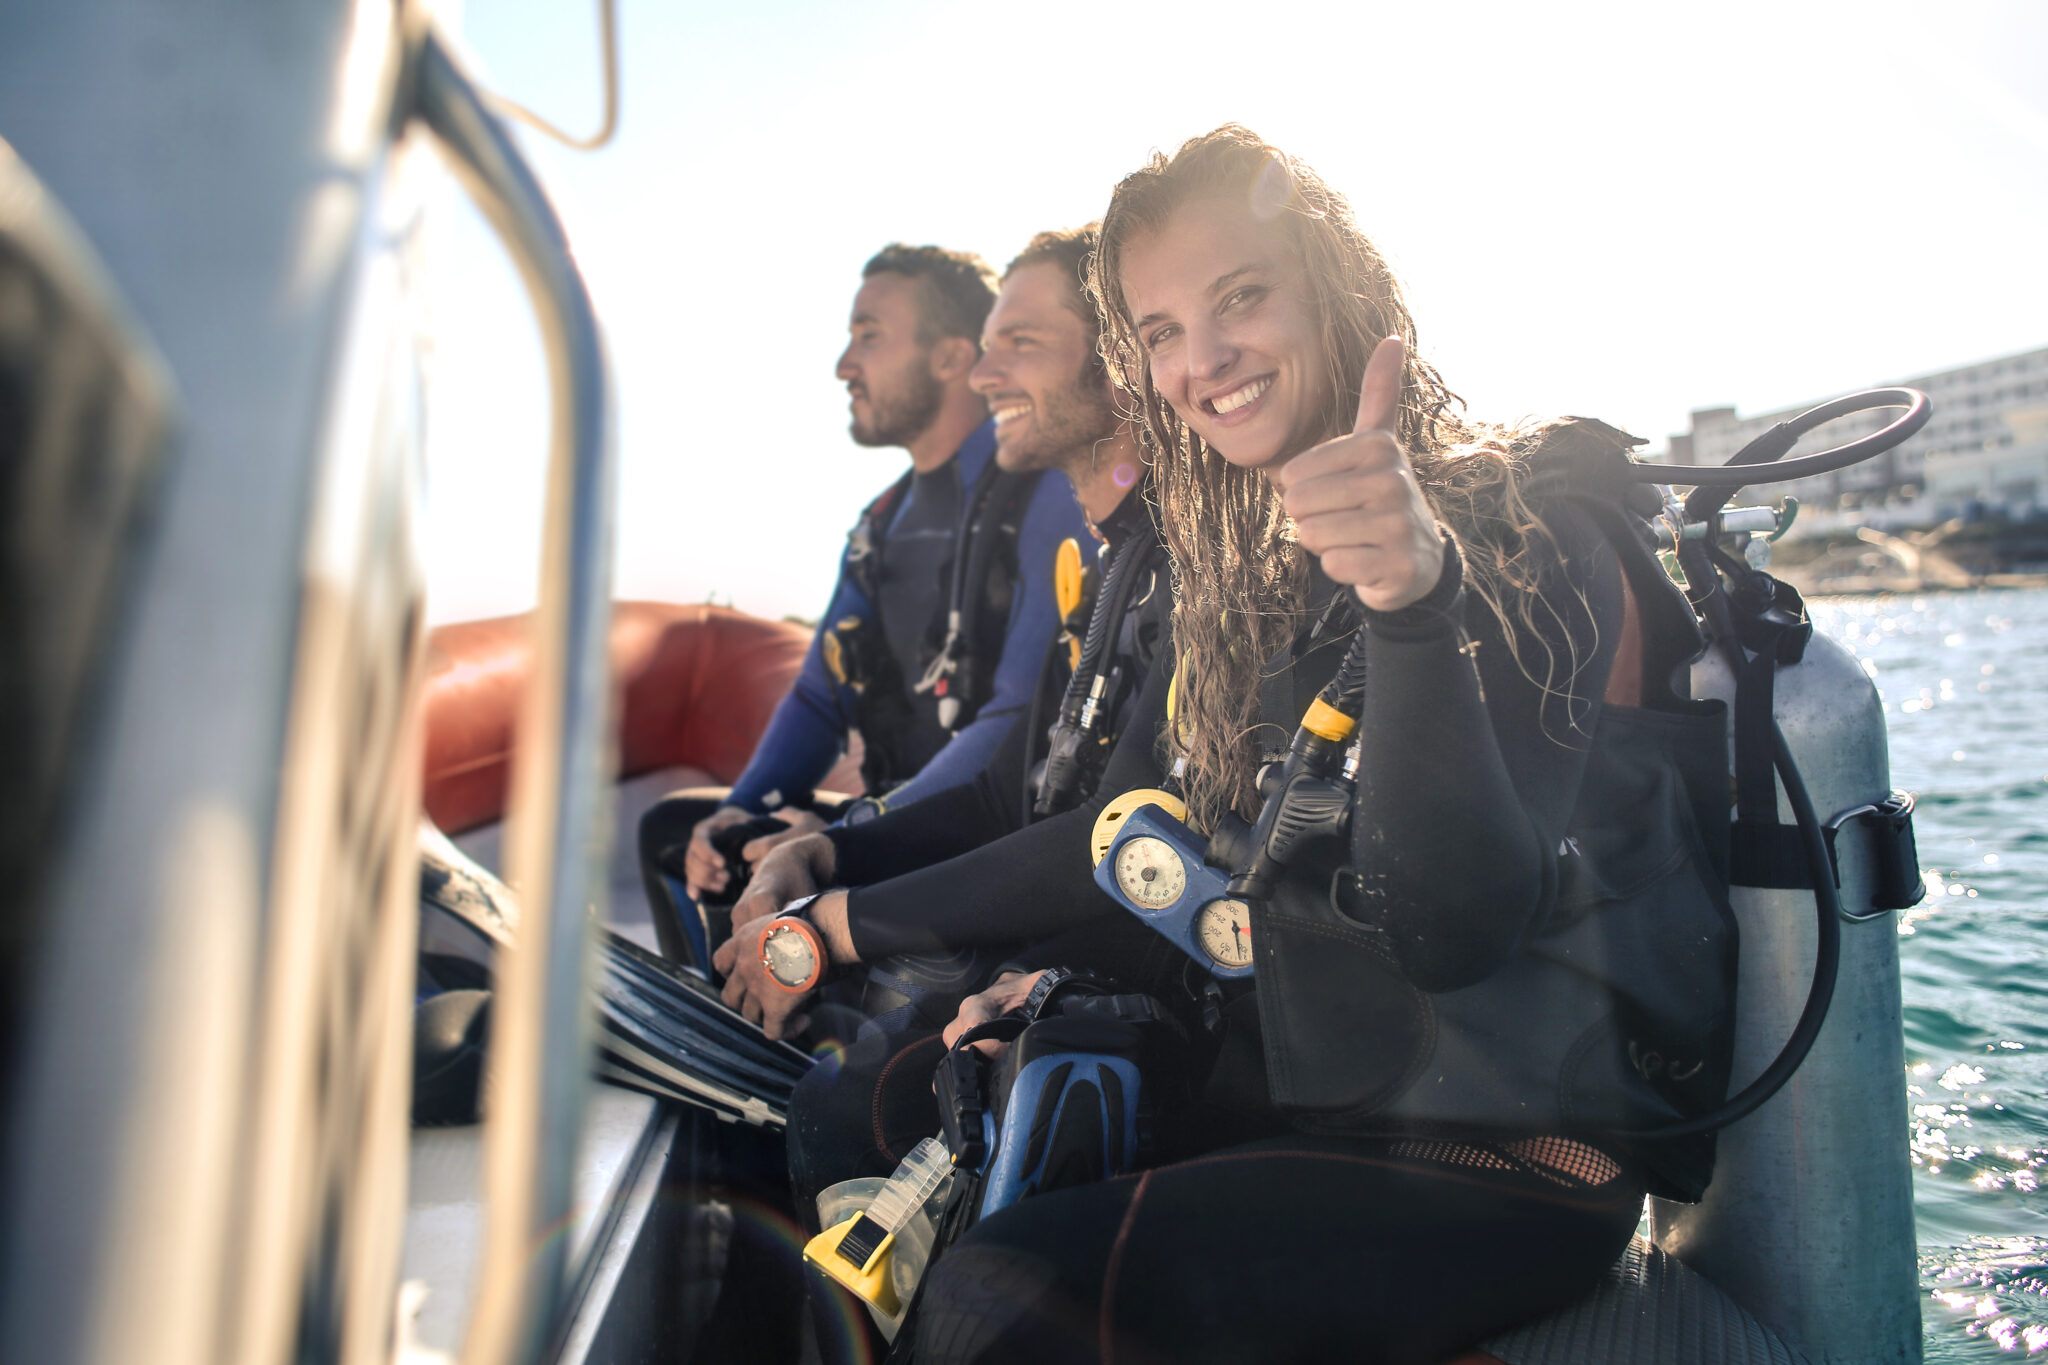 The PADI Rescue Diver Course will teach you the skills to be the best dive buddy you can be.